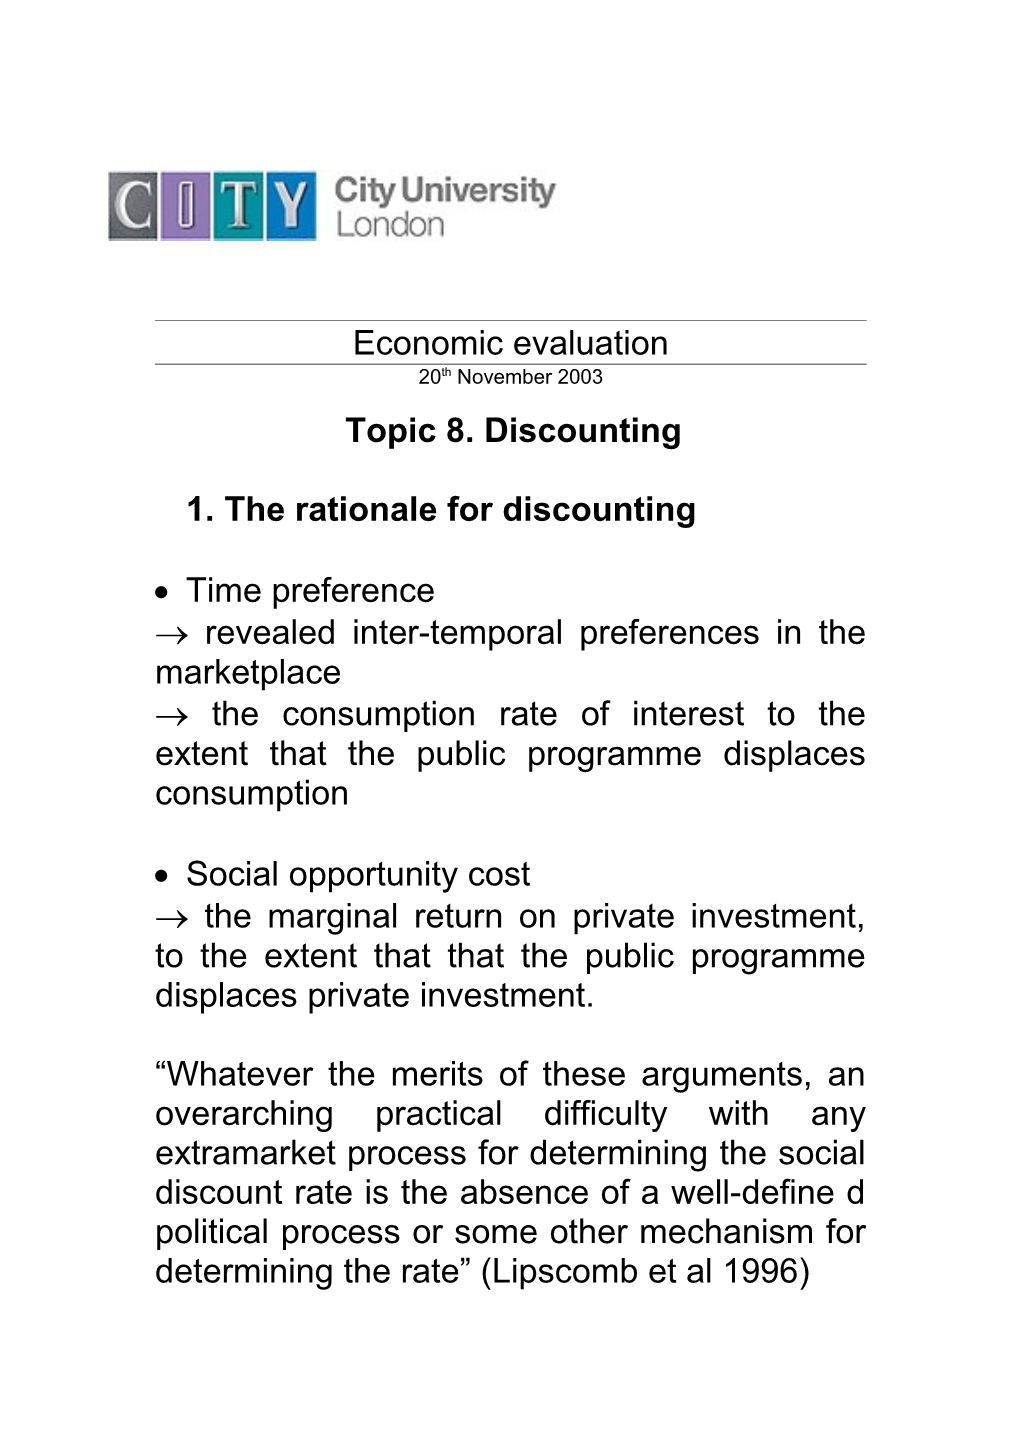 Topic 8. Discounting